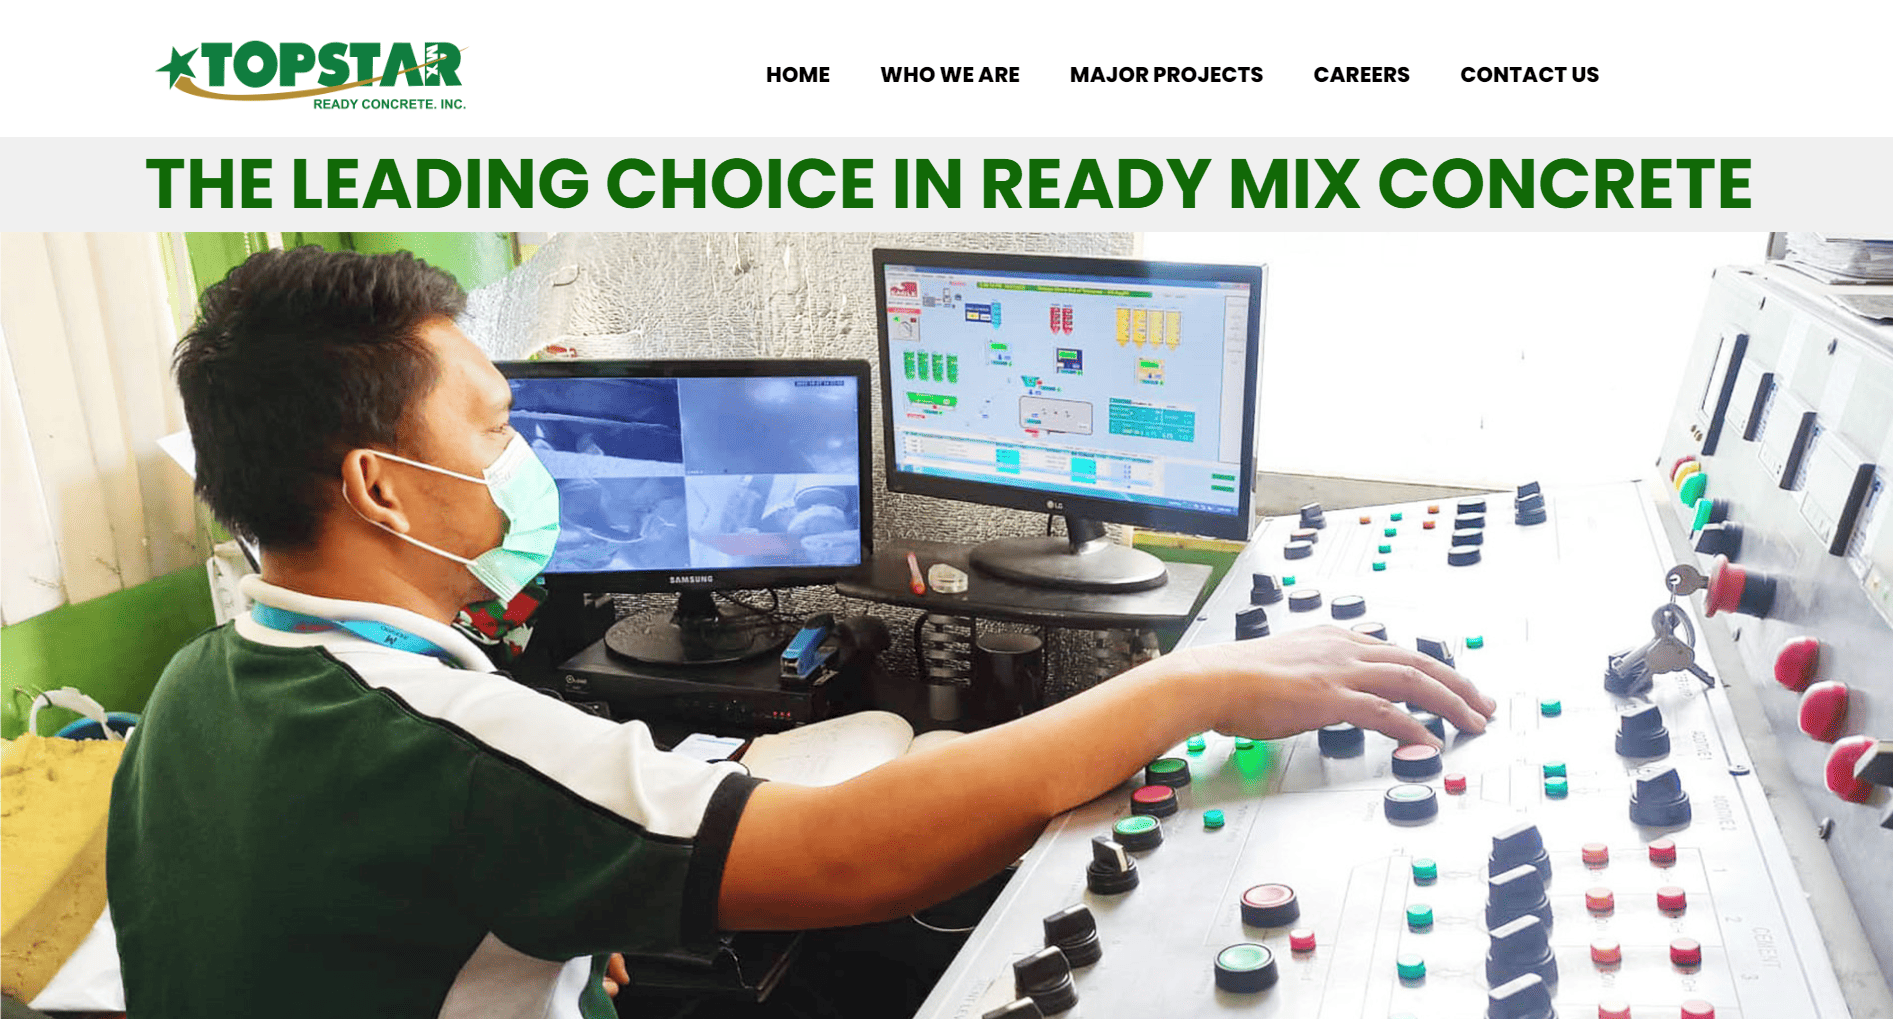 Featured image for “Topstar Mix Ready Concrete Inc.”